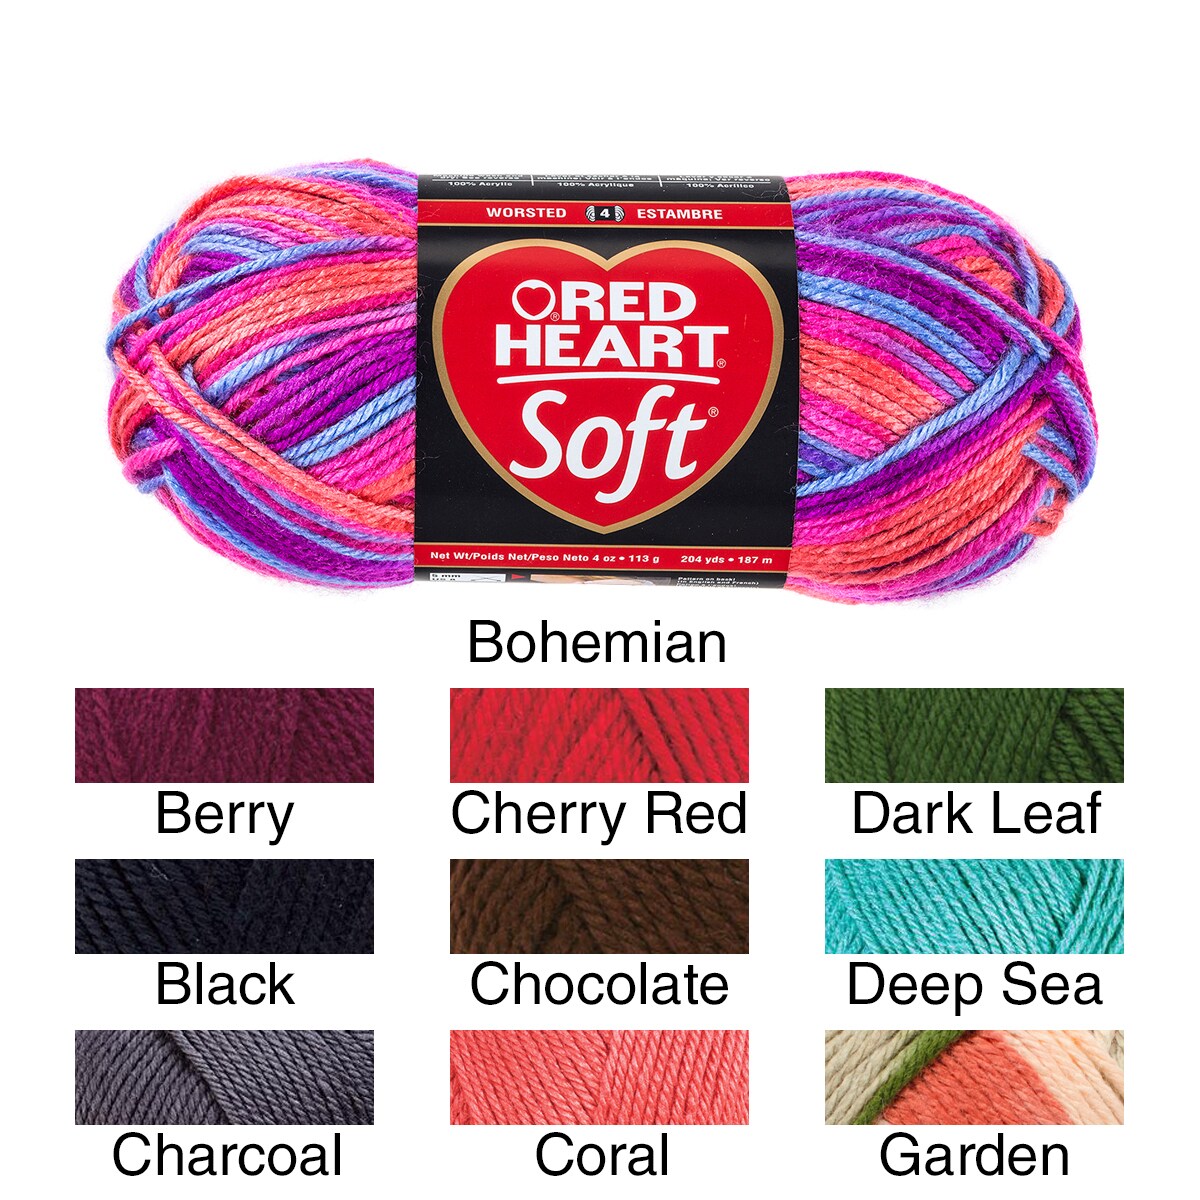 Red Heart Soft Yarn - image 3 of 3